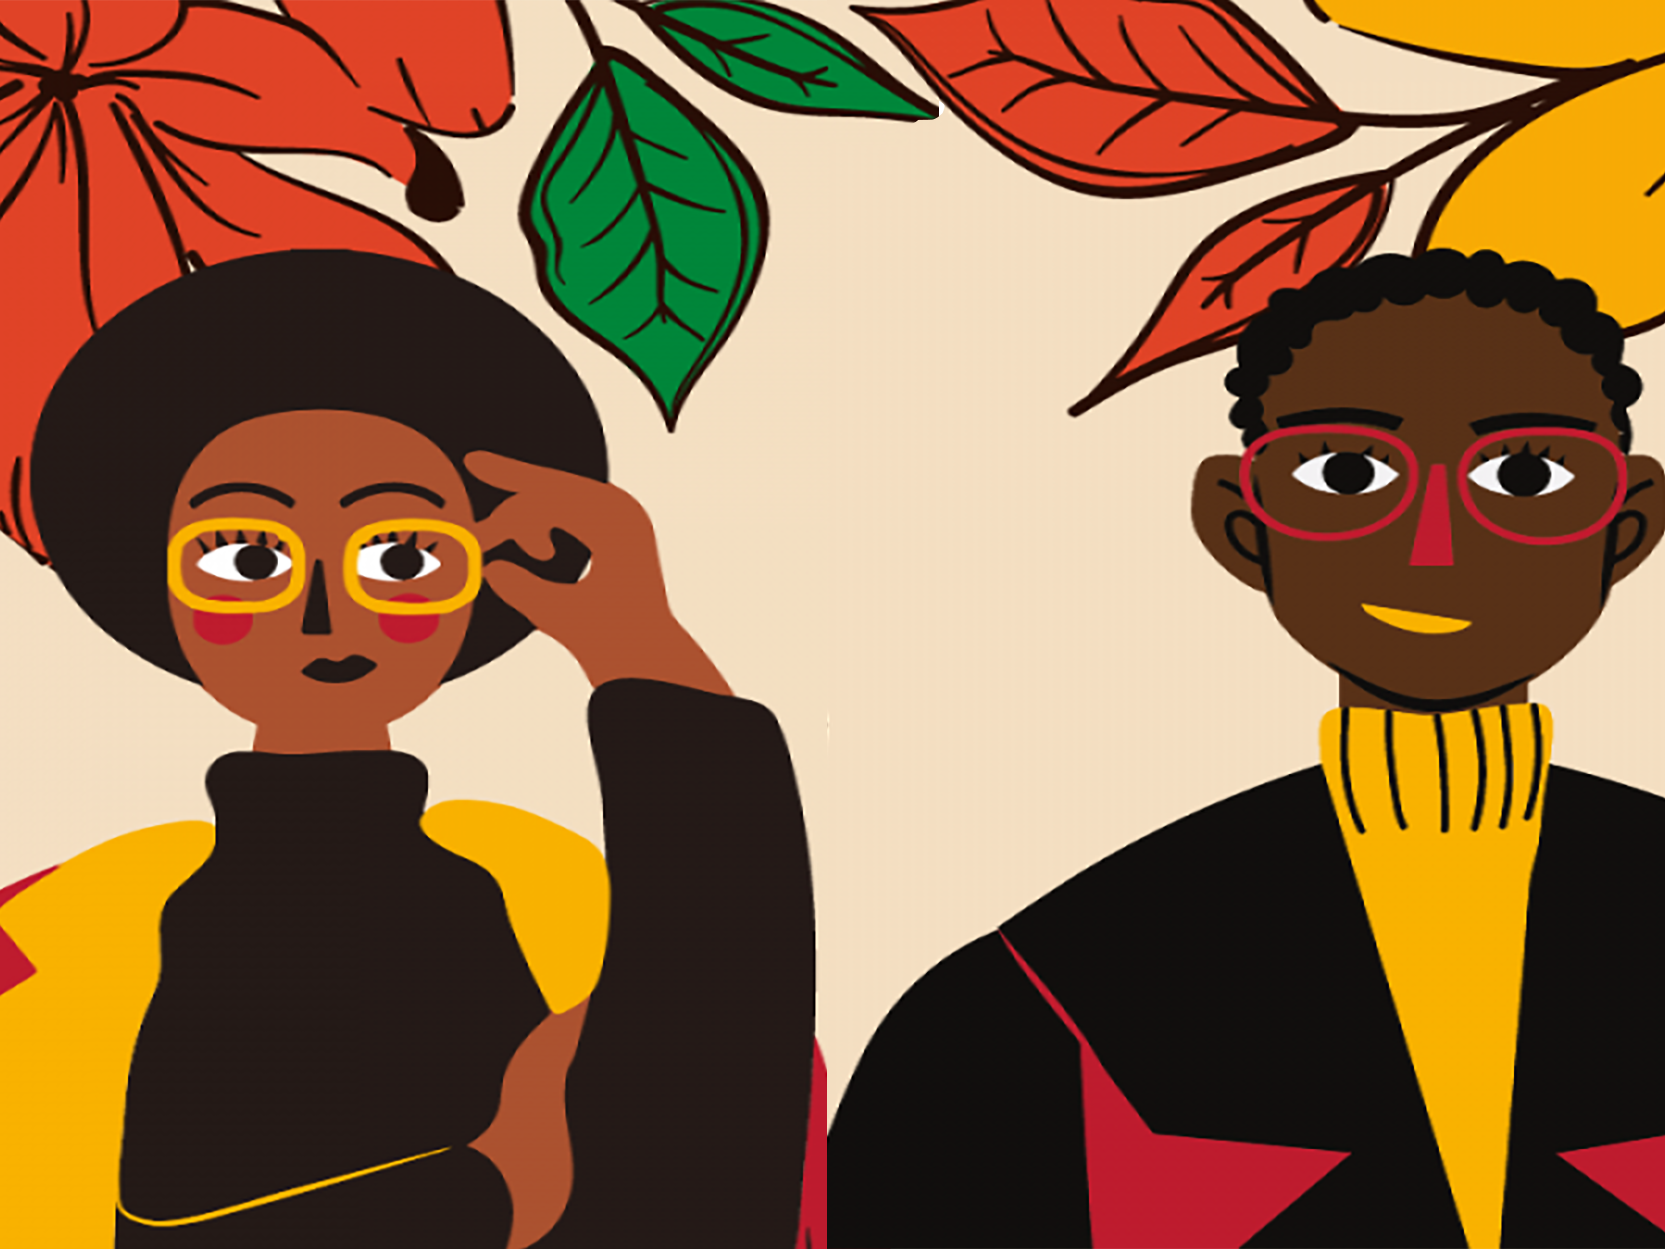 Illustration with a Black woman and a Black man, with red, green, and yellow leaves behind